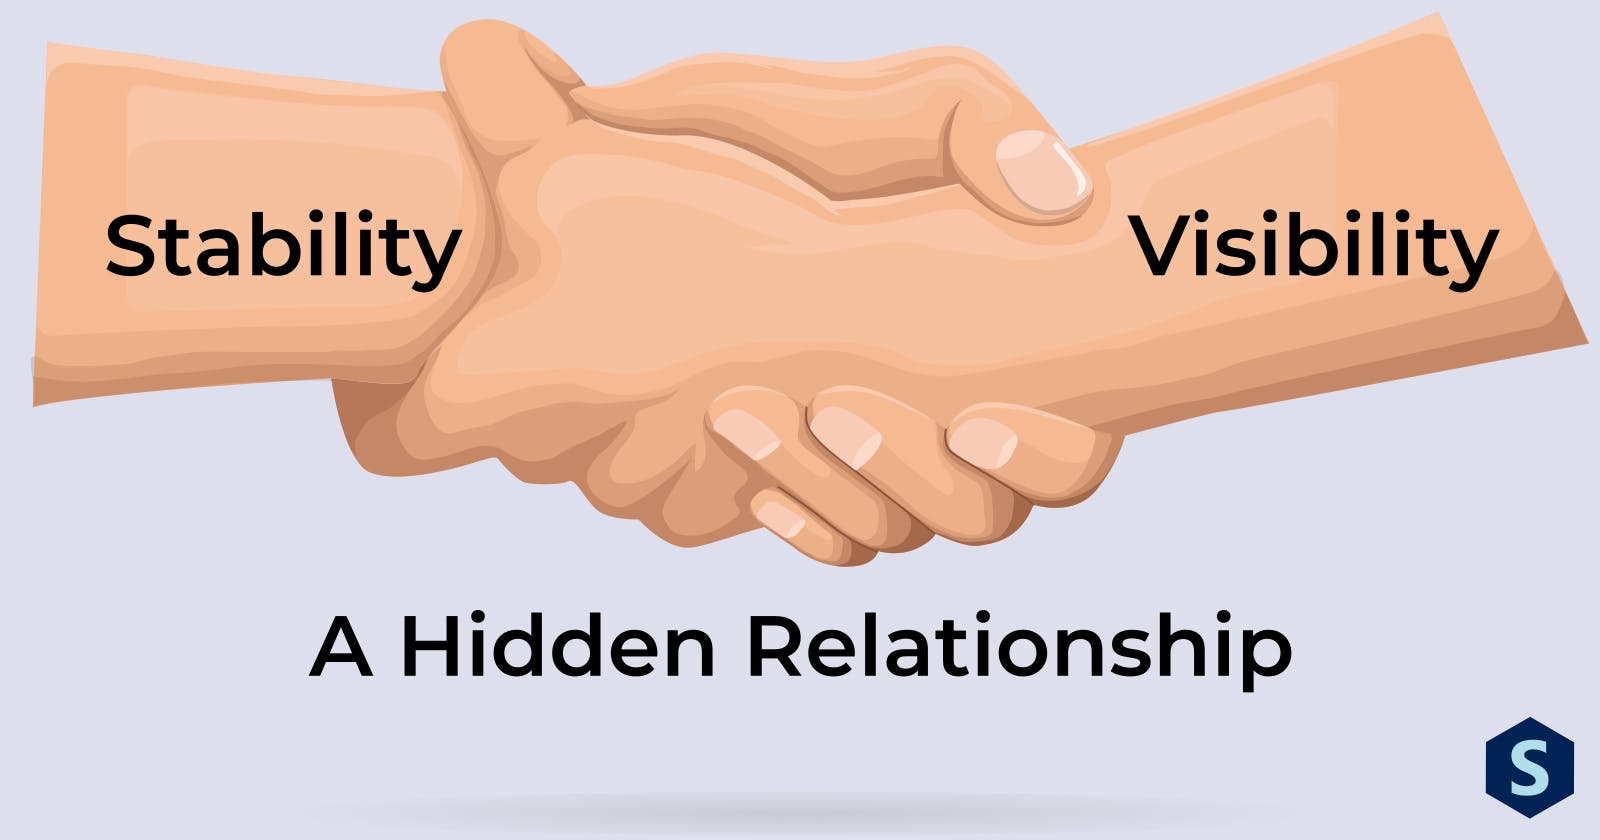 Visibility and Stability: A Hidden Relationship